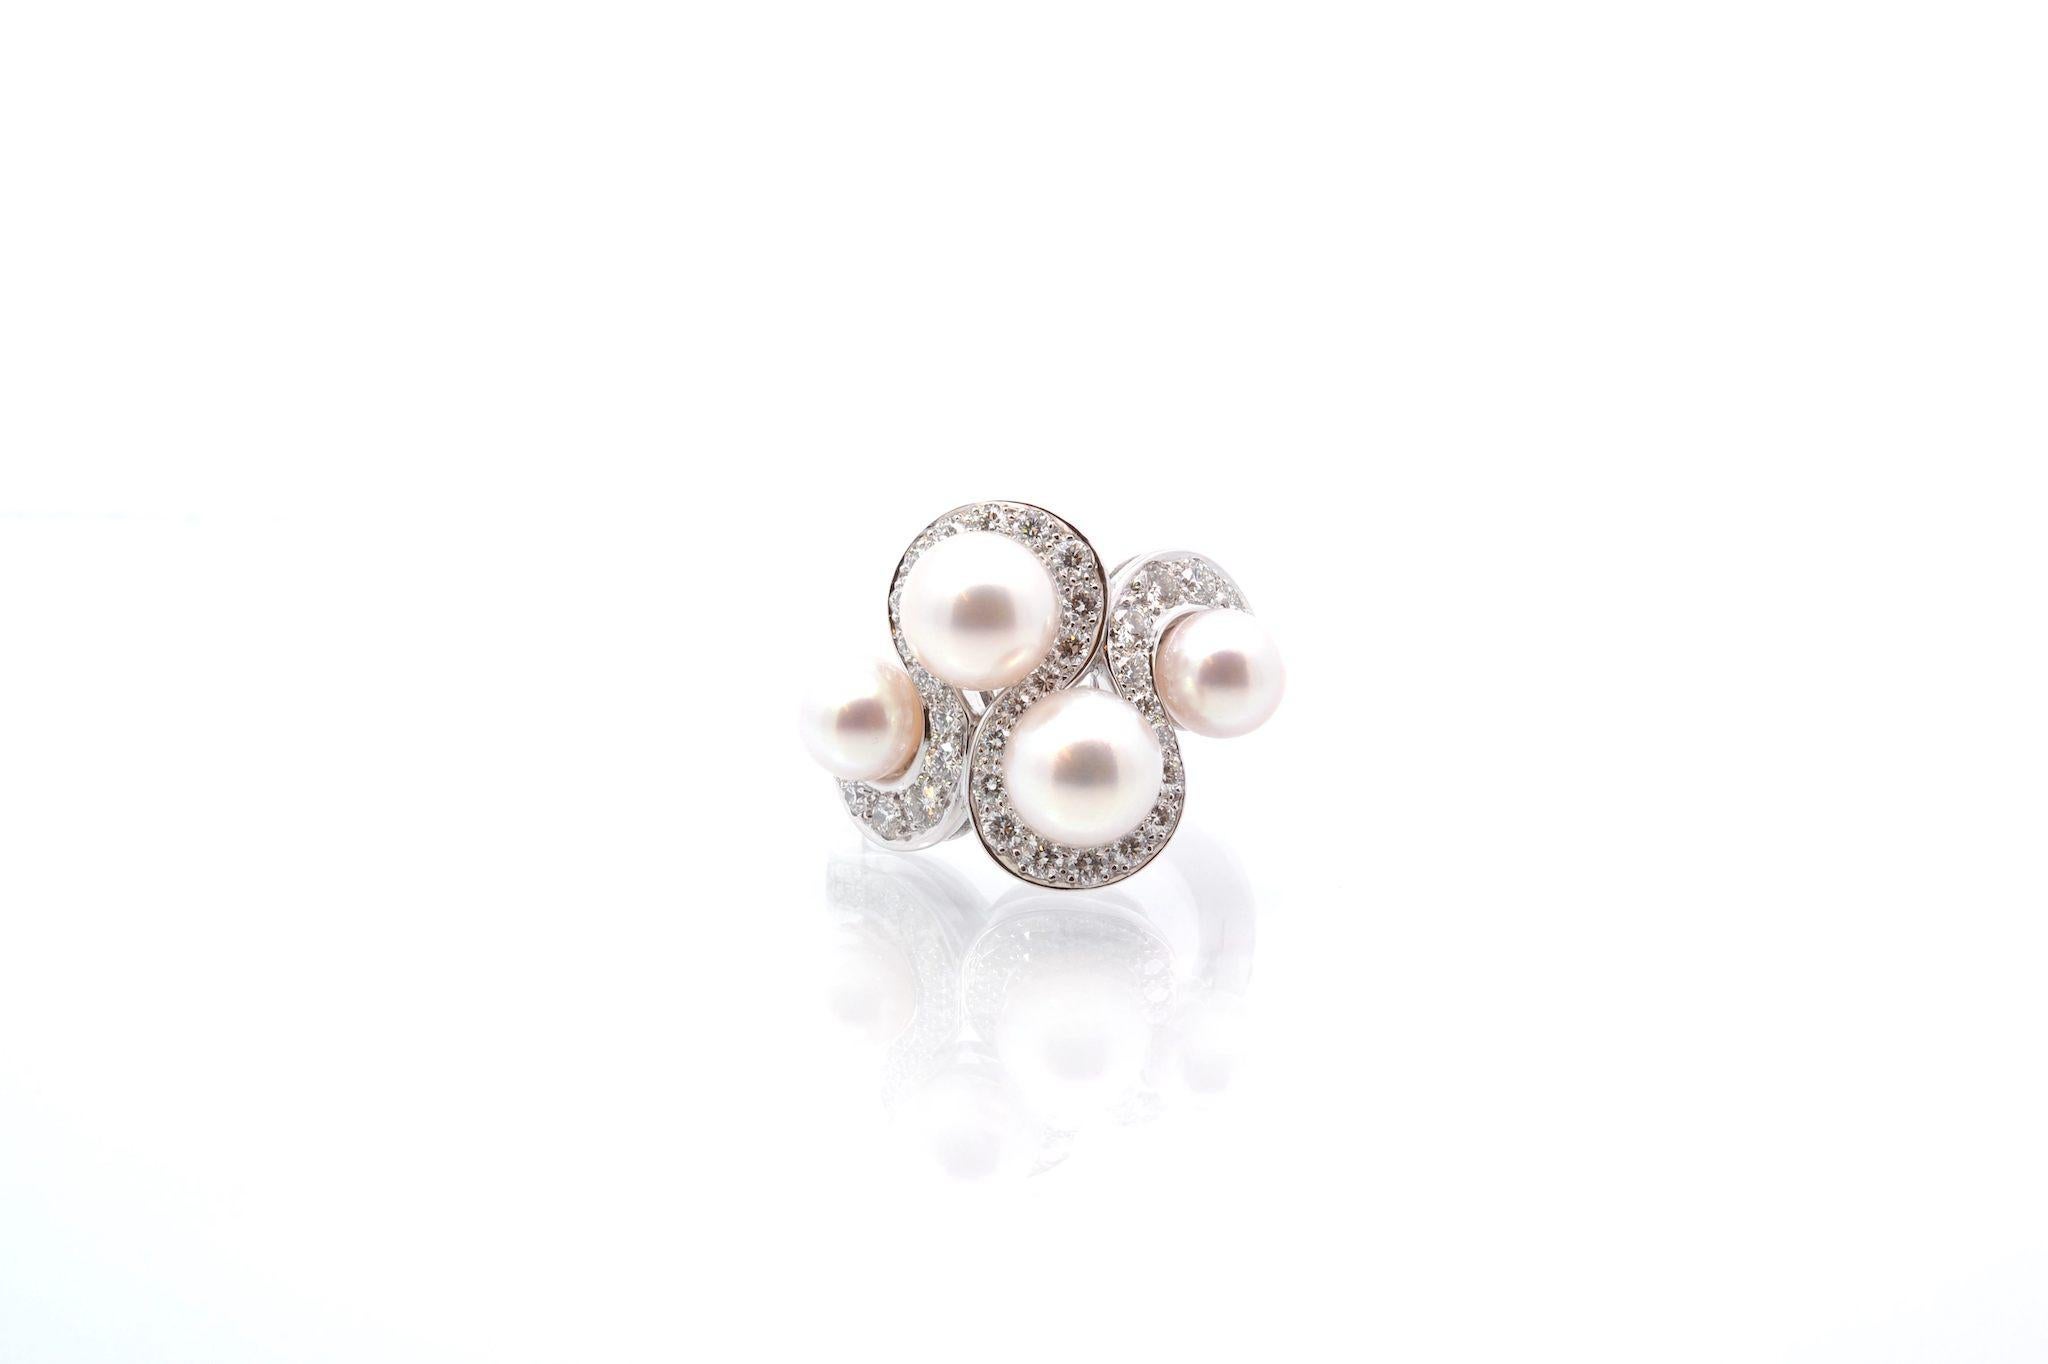 Stones: 38 diamonds: 1.45ct, 2 pearls of 7.5mm and 2 pearls of 6mm
Material: 18k white gold
Dimensions: 2 cm (top view)
Weight: 11.1g
Period: Recent
Size: 54 (free sizing)
Certificate
Ref. : 25407